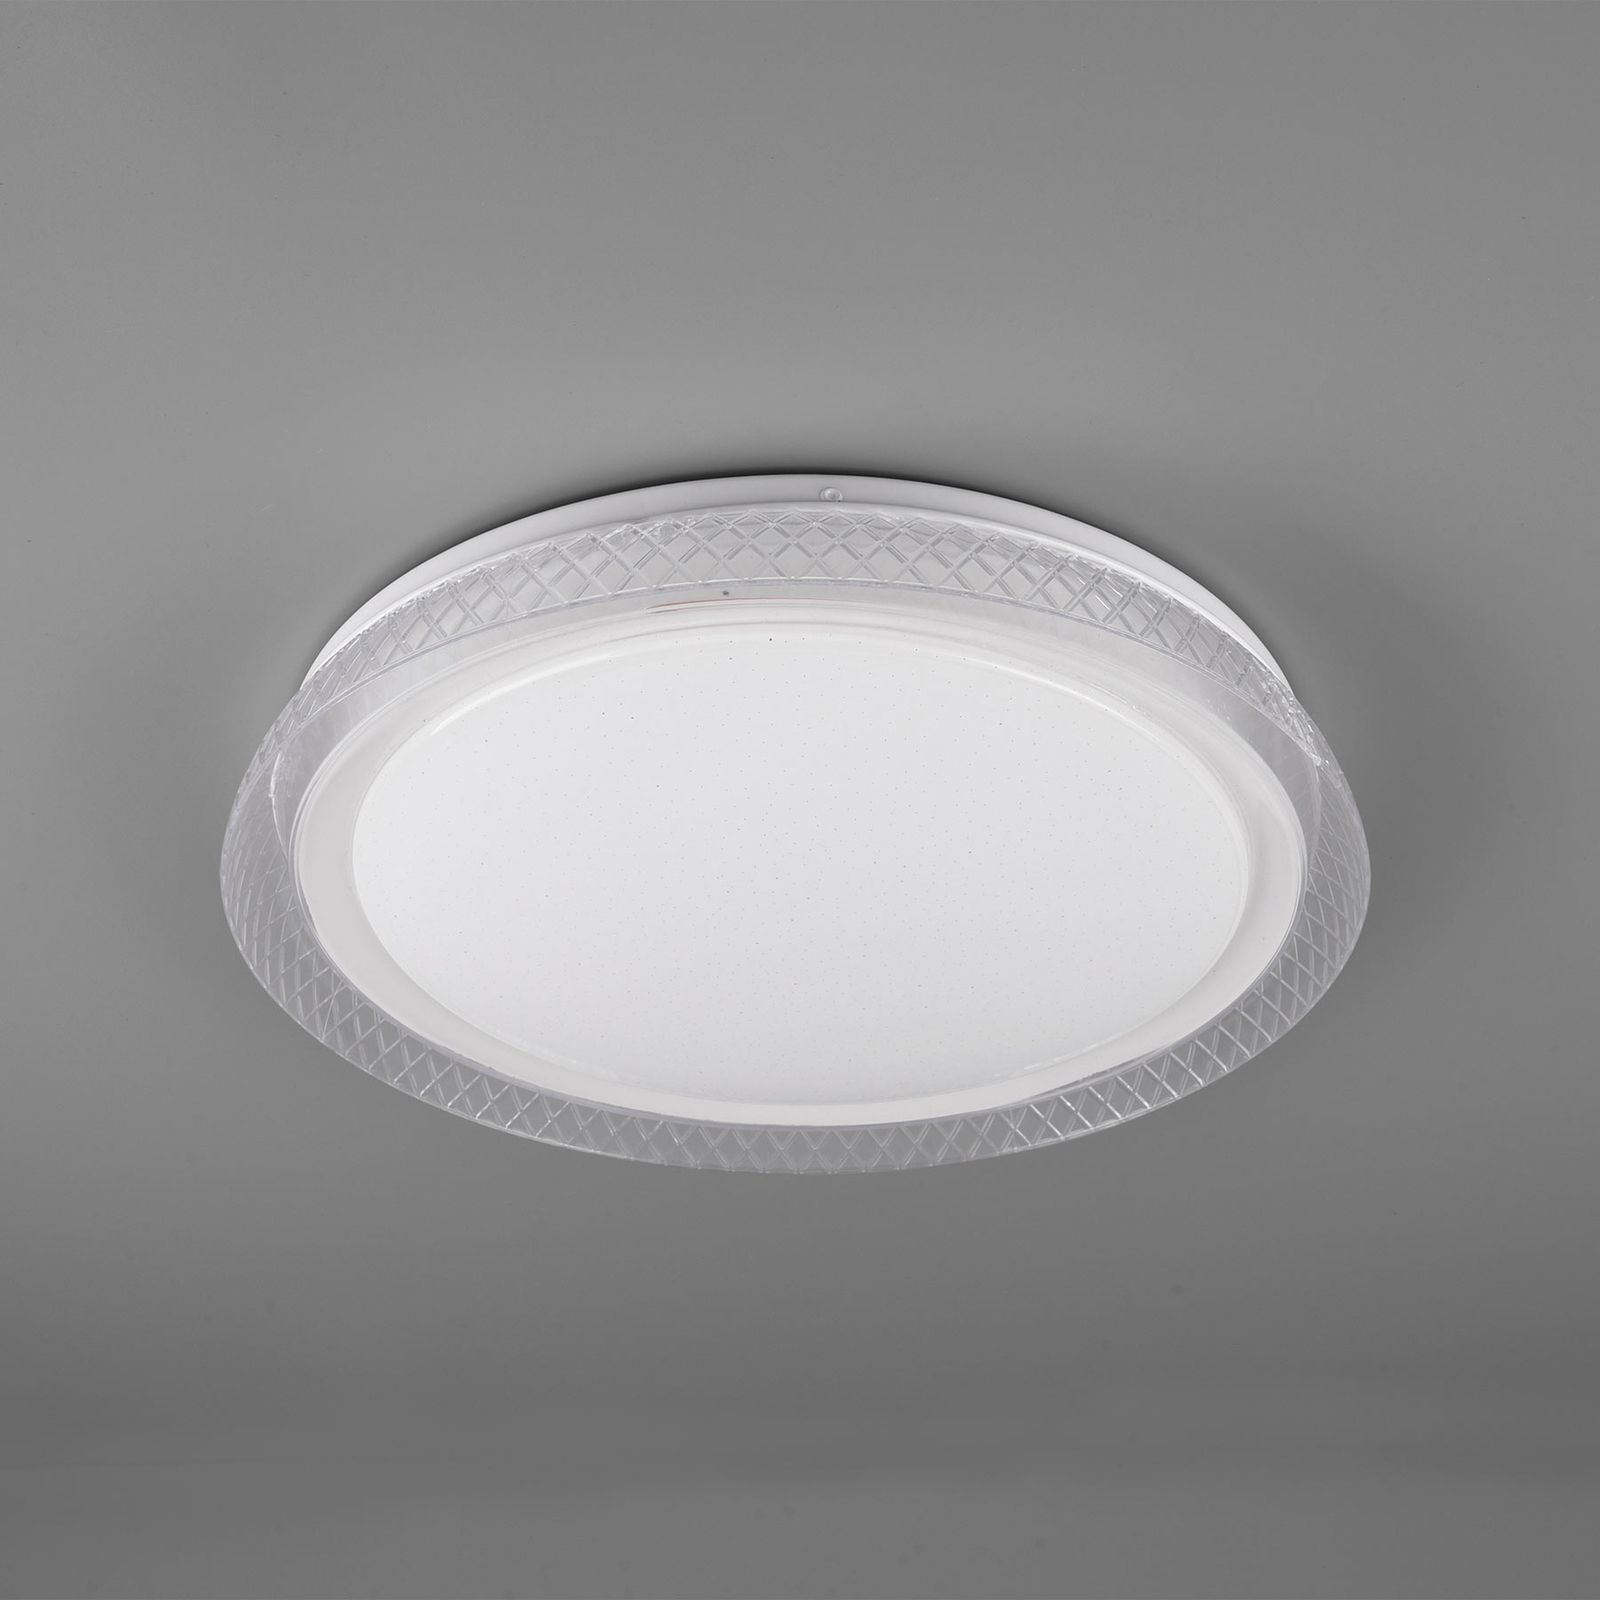 Plafonnier LED Heracles, tunable white, Ø 38 cm